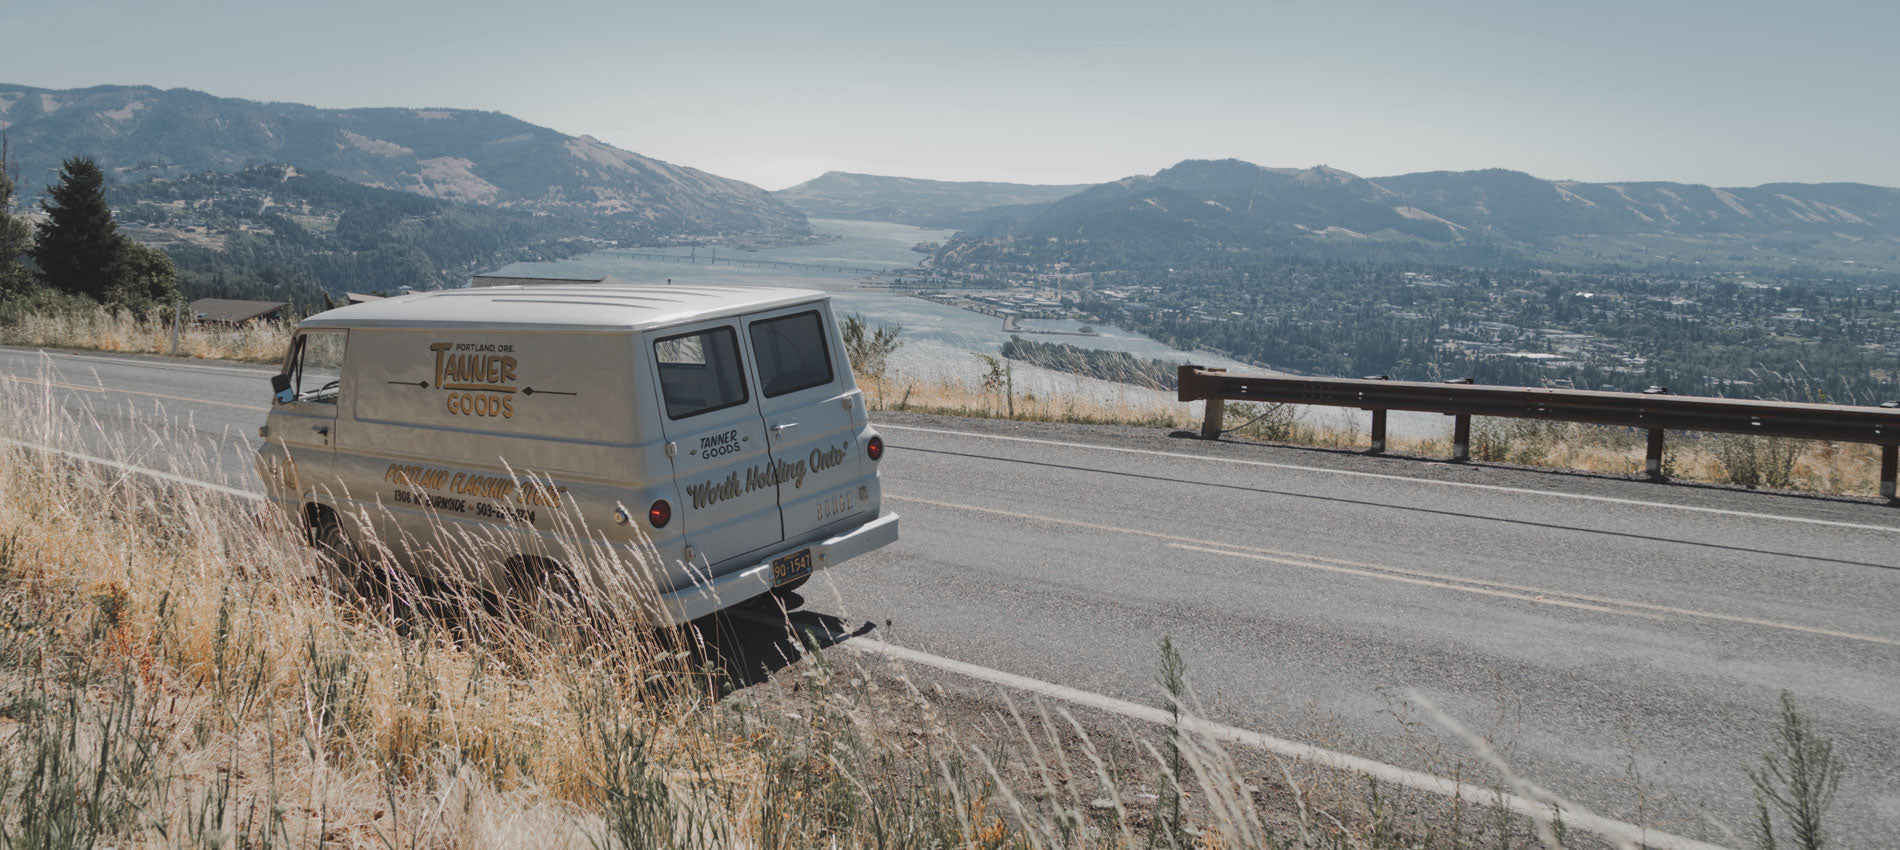 A white conversion van with Tanner Goods decals parked on the side of the road overlooking the Columbia River Gorge.